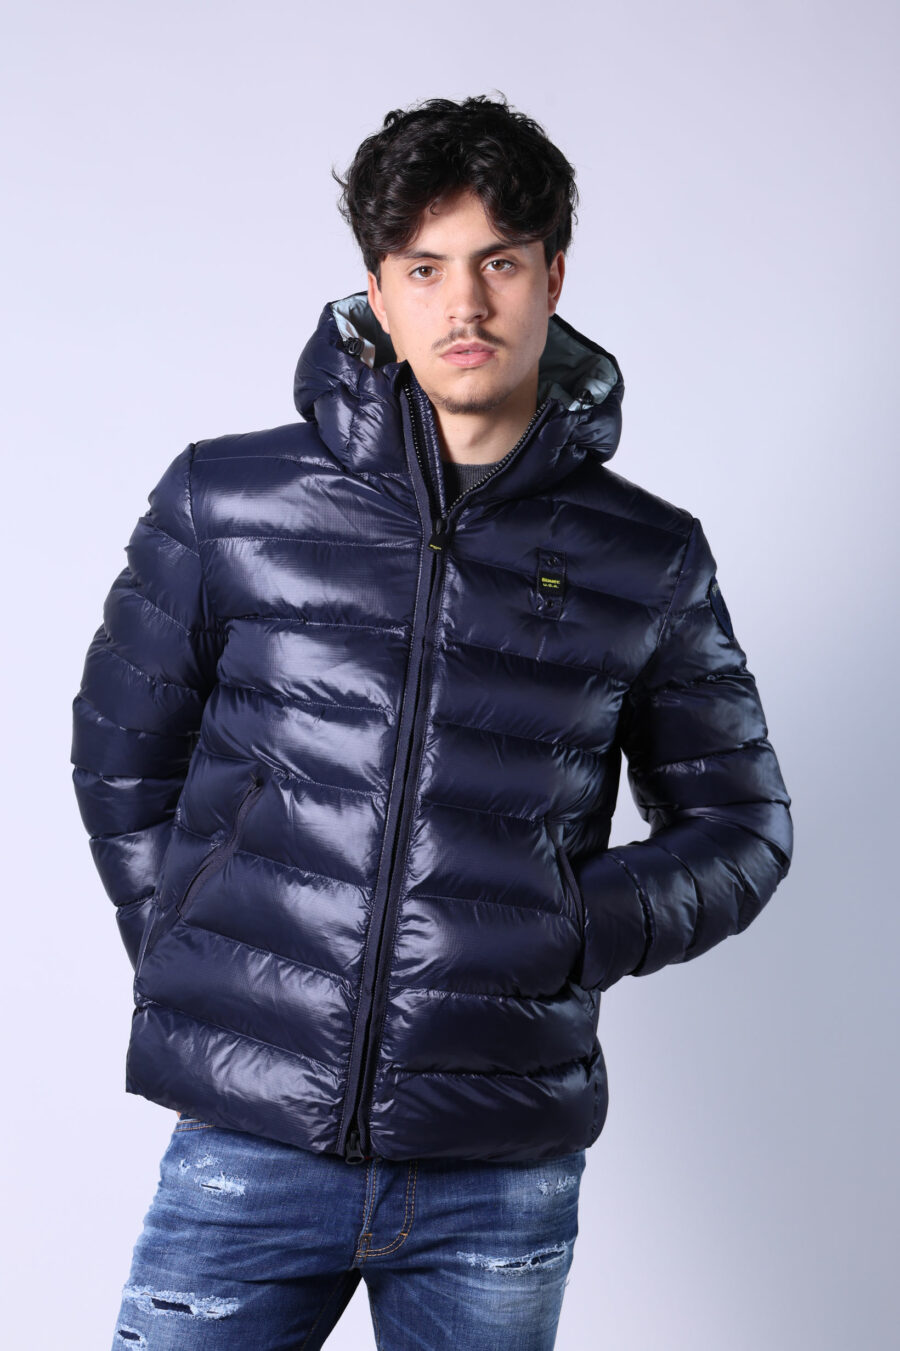 Blue hooded jacket with straight lines and light blue interior - Untitled Catalog 05574